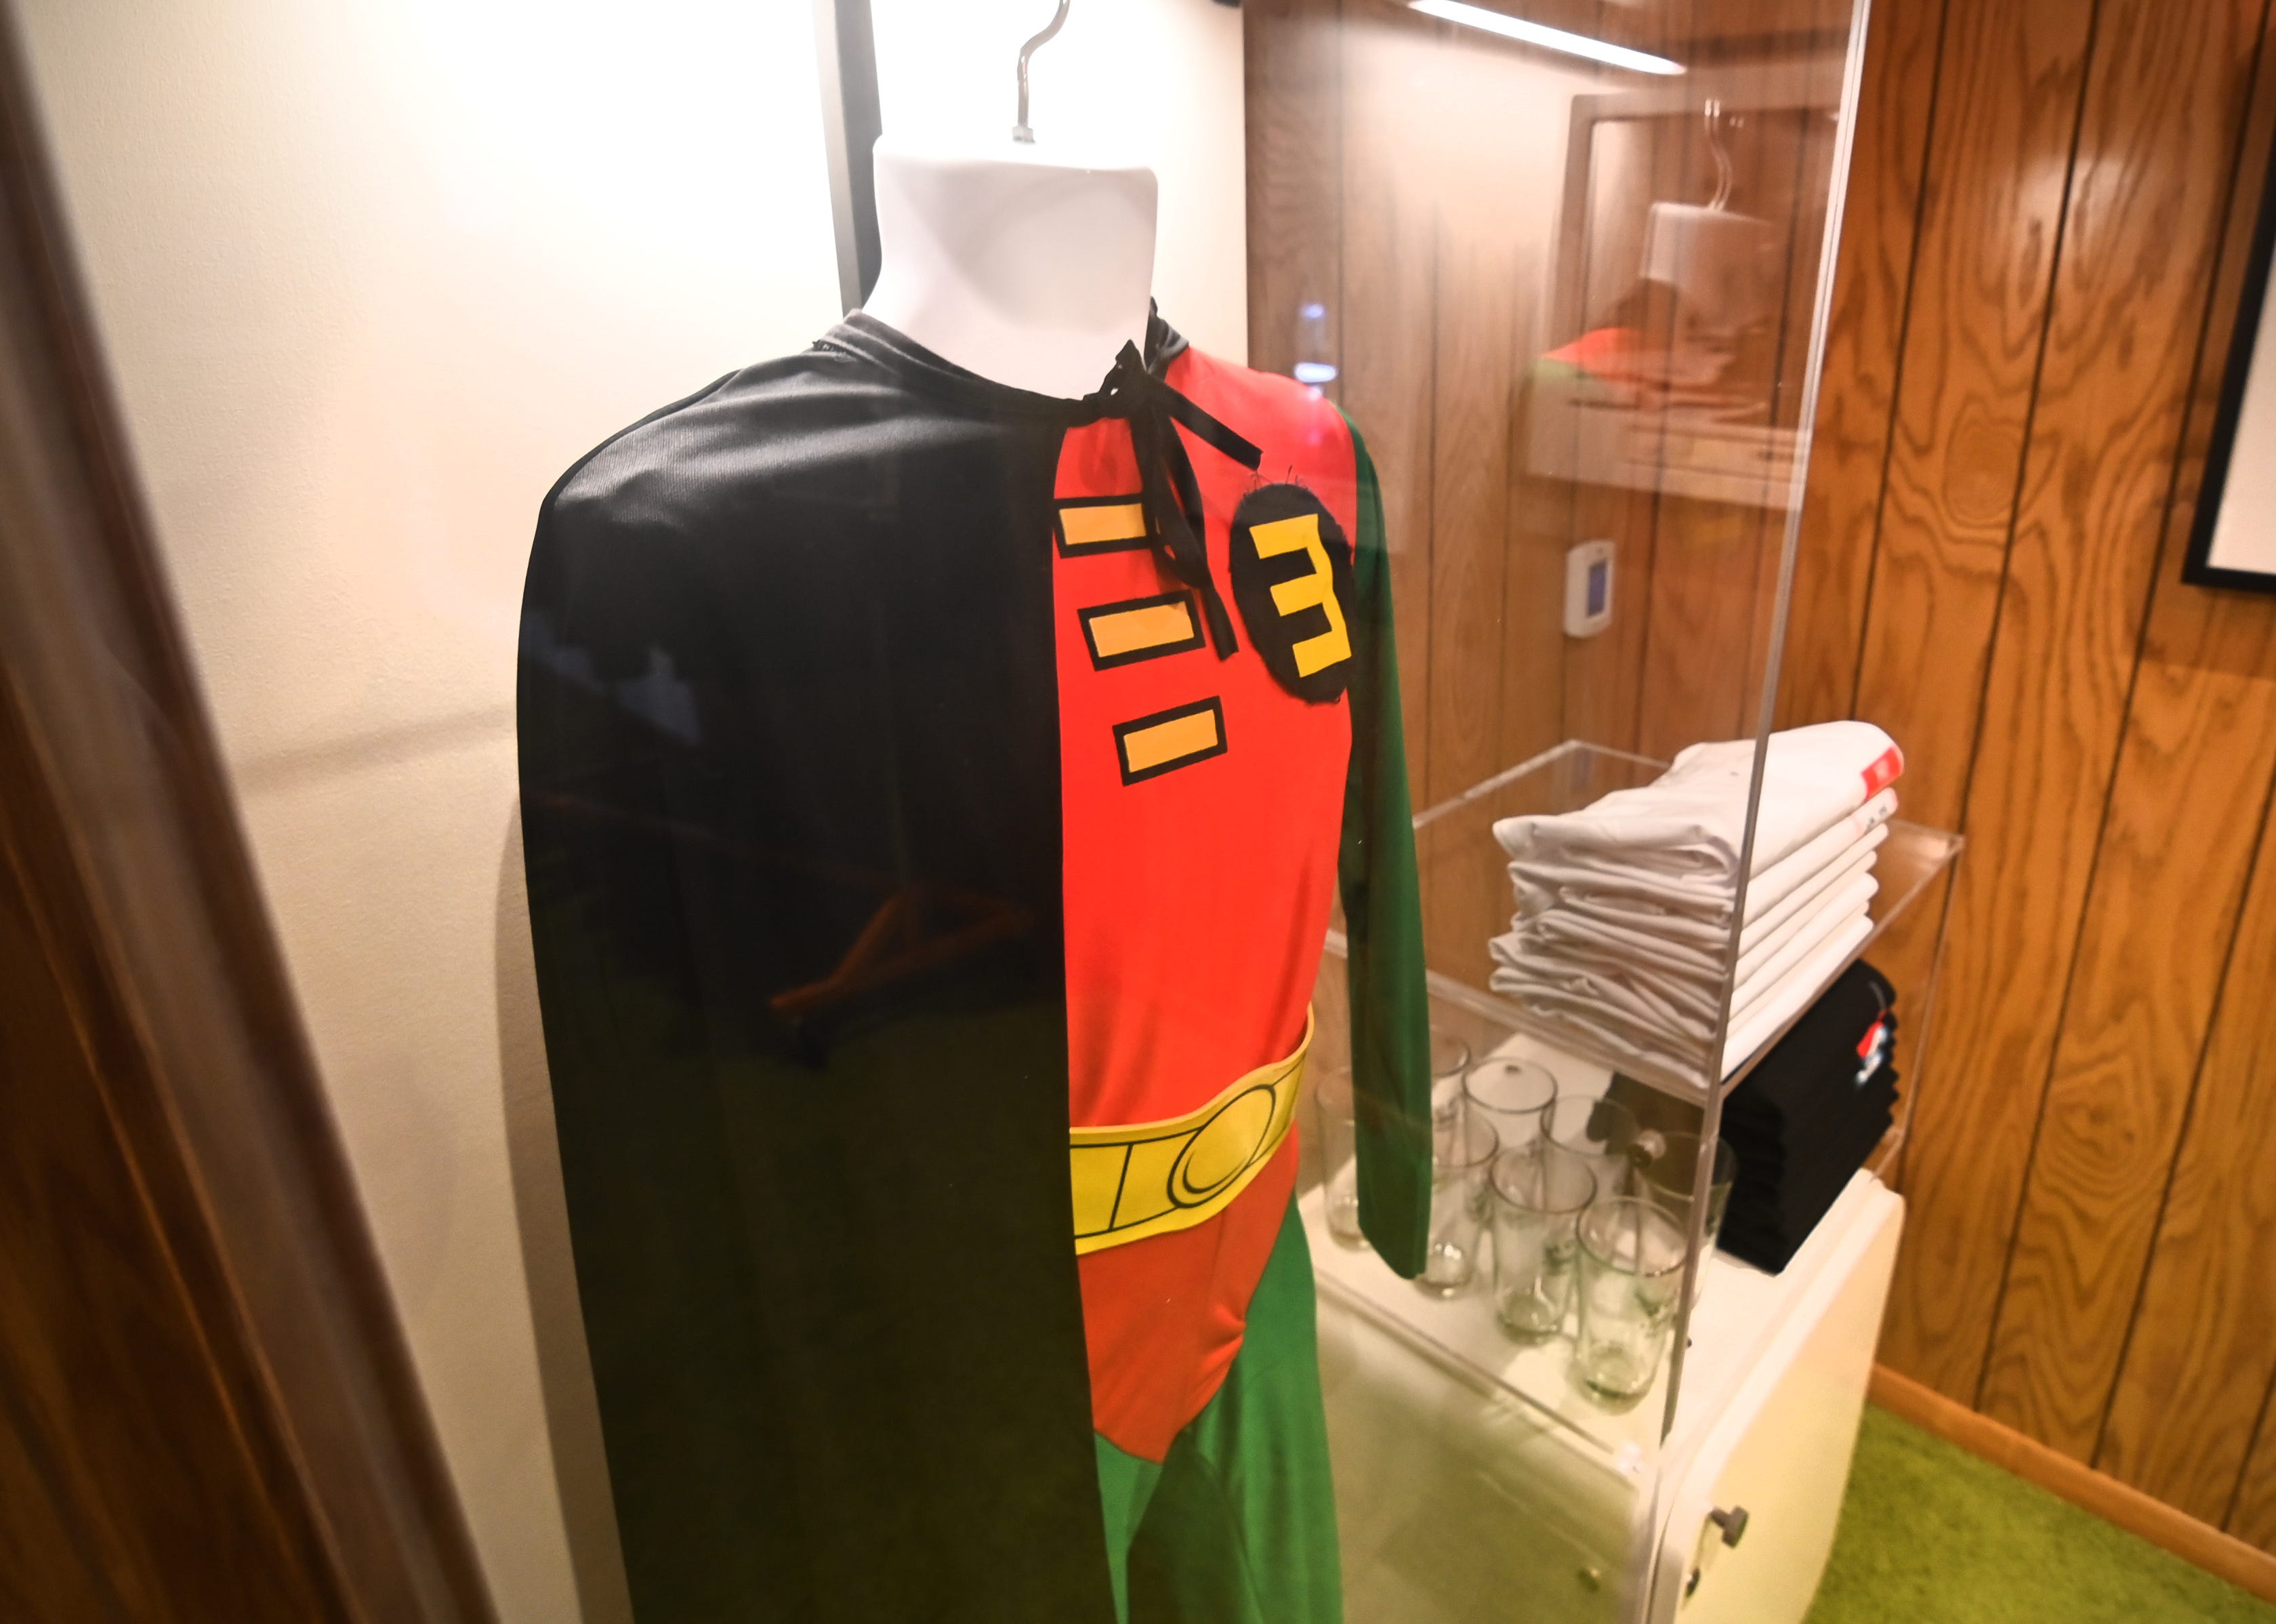 The Robin costume from Eminem's "Without Me" video is seen inside The Trailer shop at Mom’s Spaghetti.